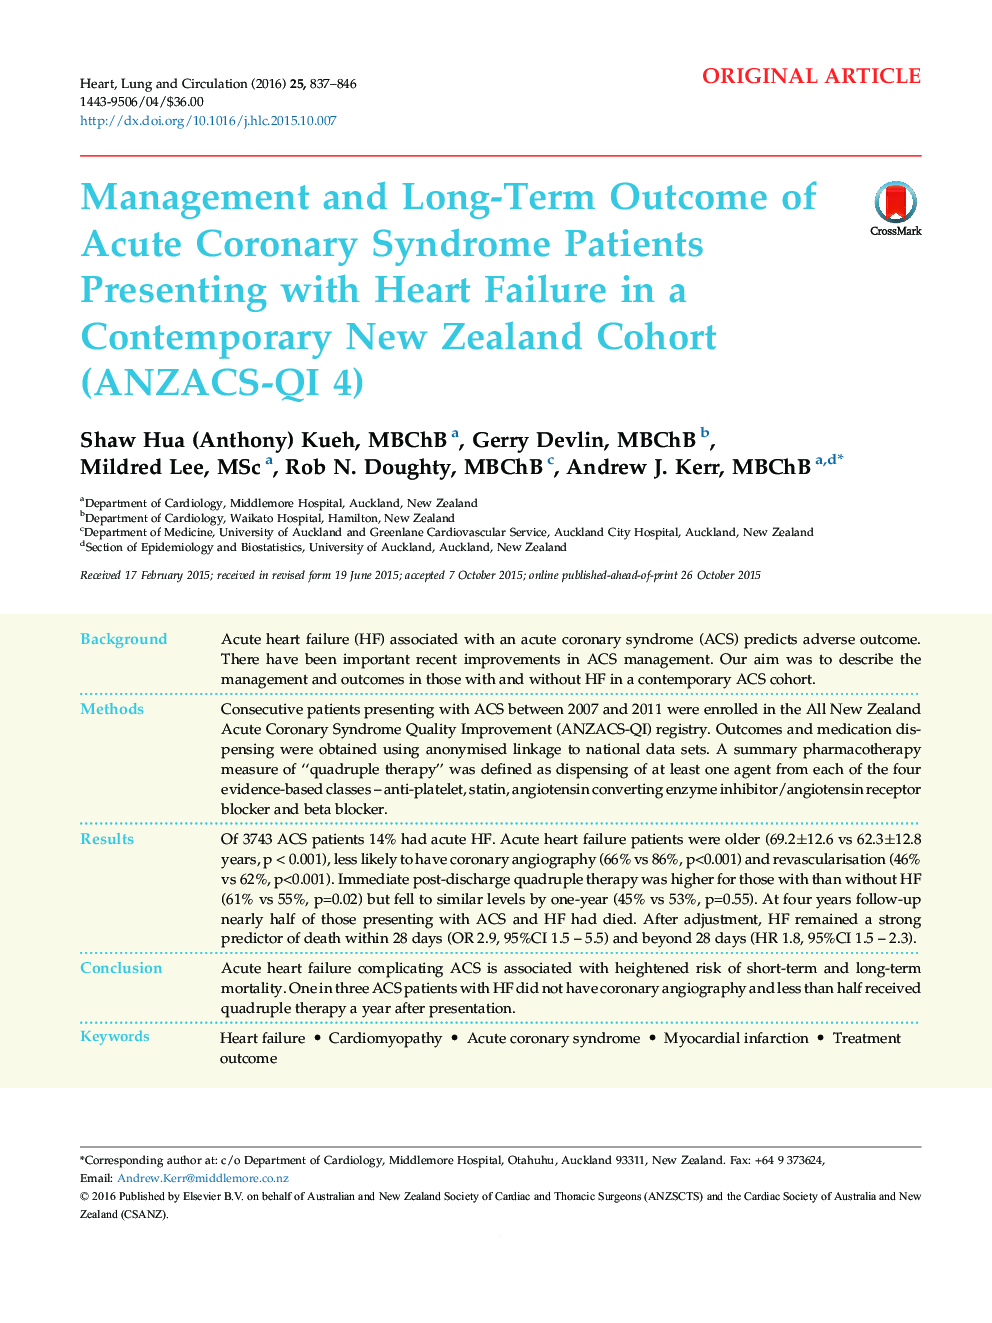 Management and Long-Term Outcome of Acute Coronary Syndrome Patients Presenting with Heart Failure in a Contemporary New Zealand Cohort (ANZACS-QI 4)